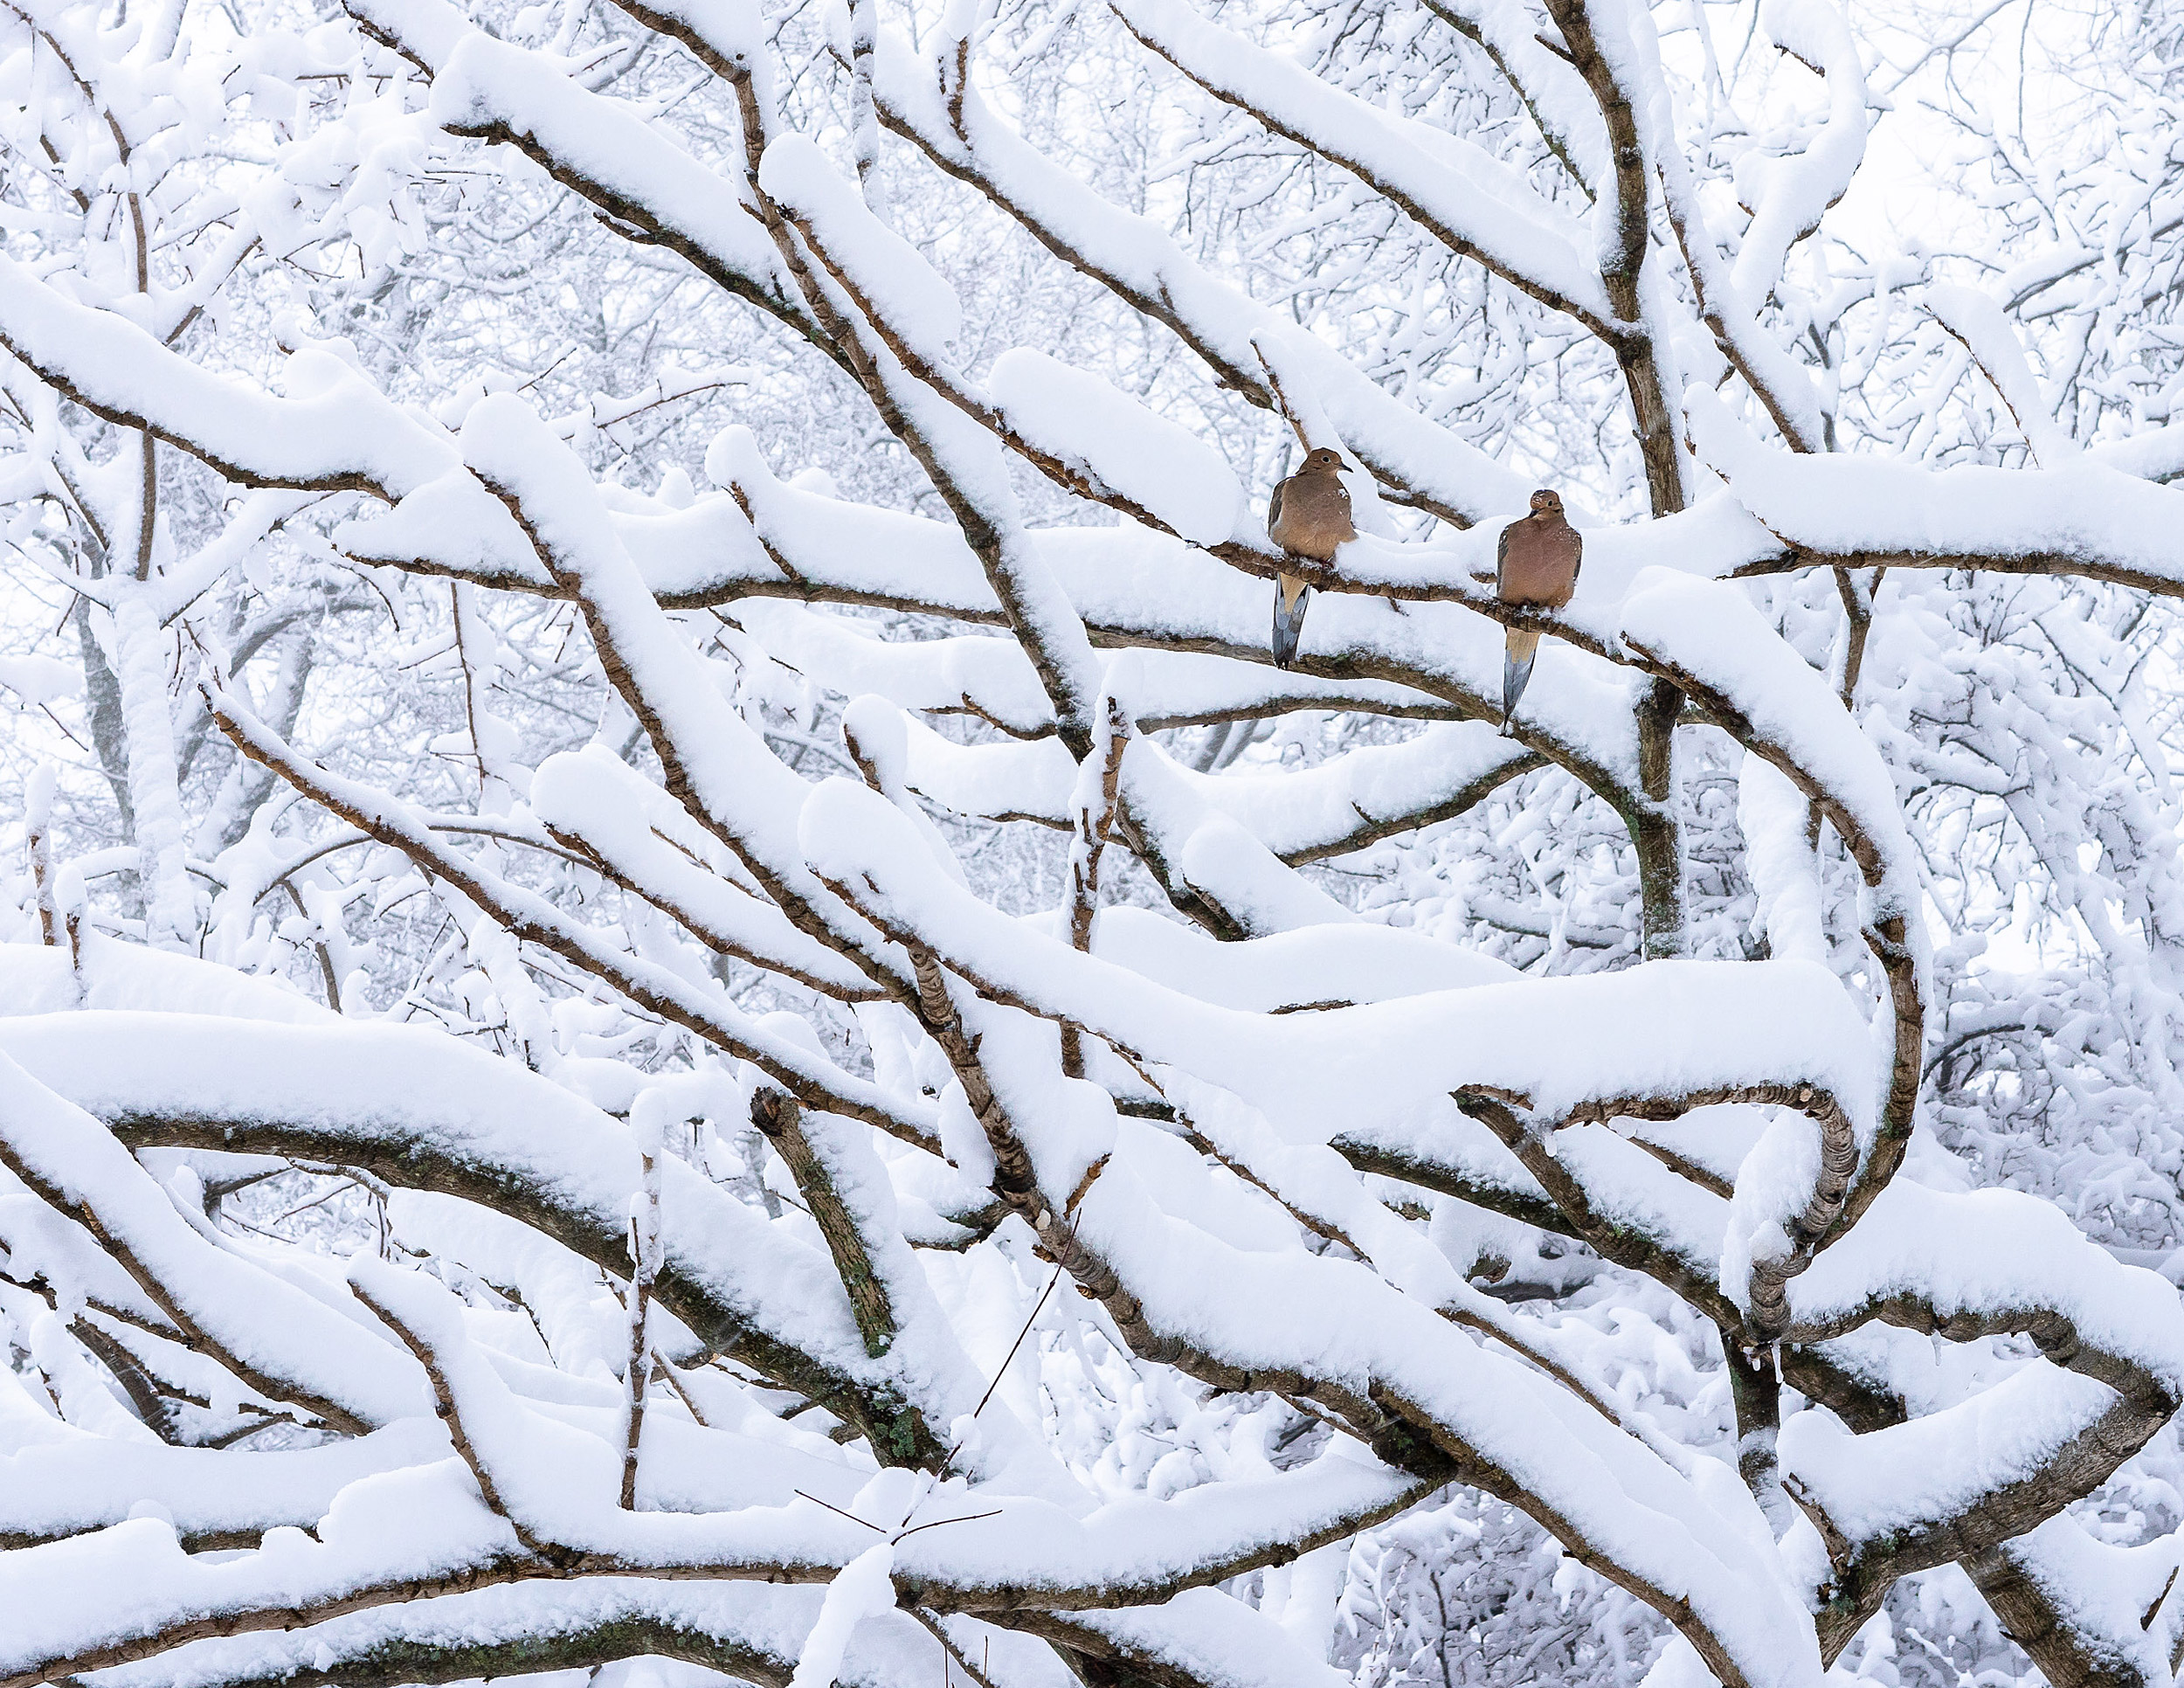 Mourning doves in snowy branches.